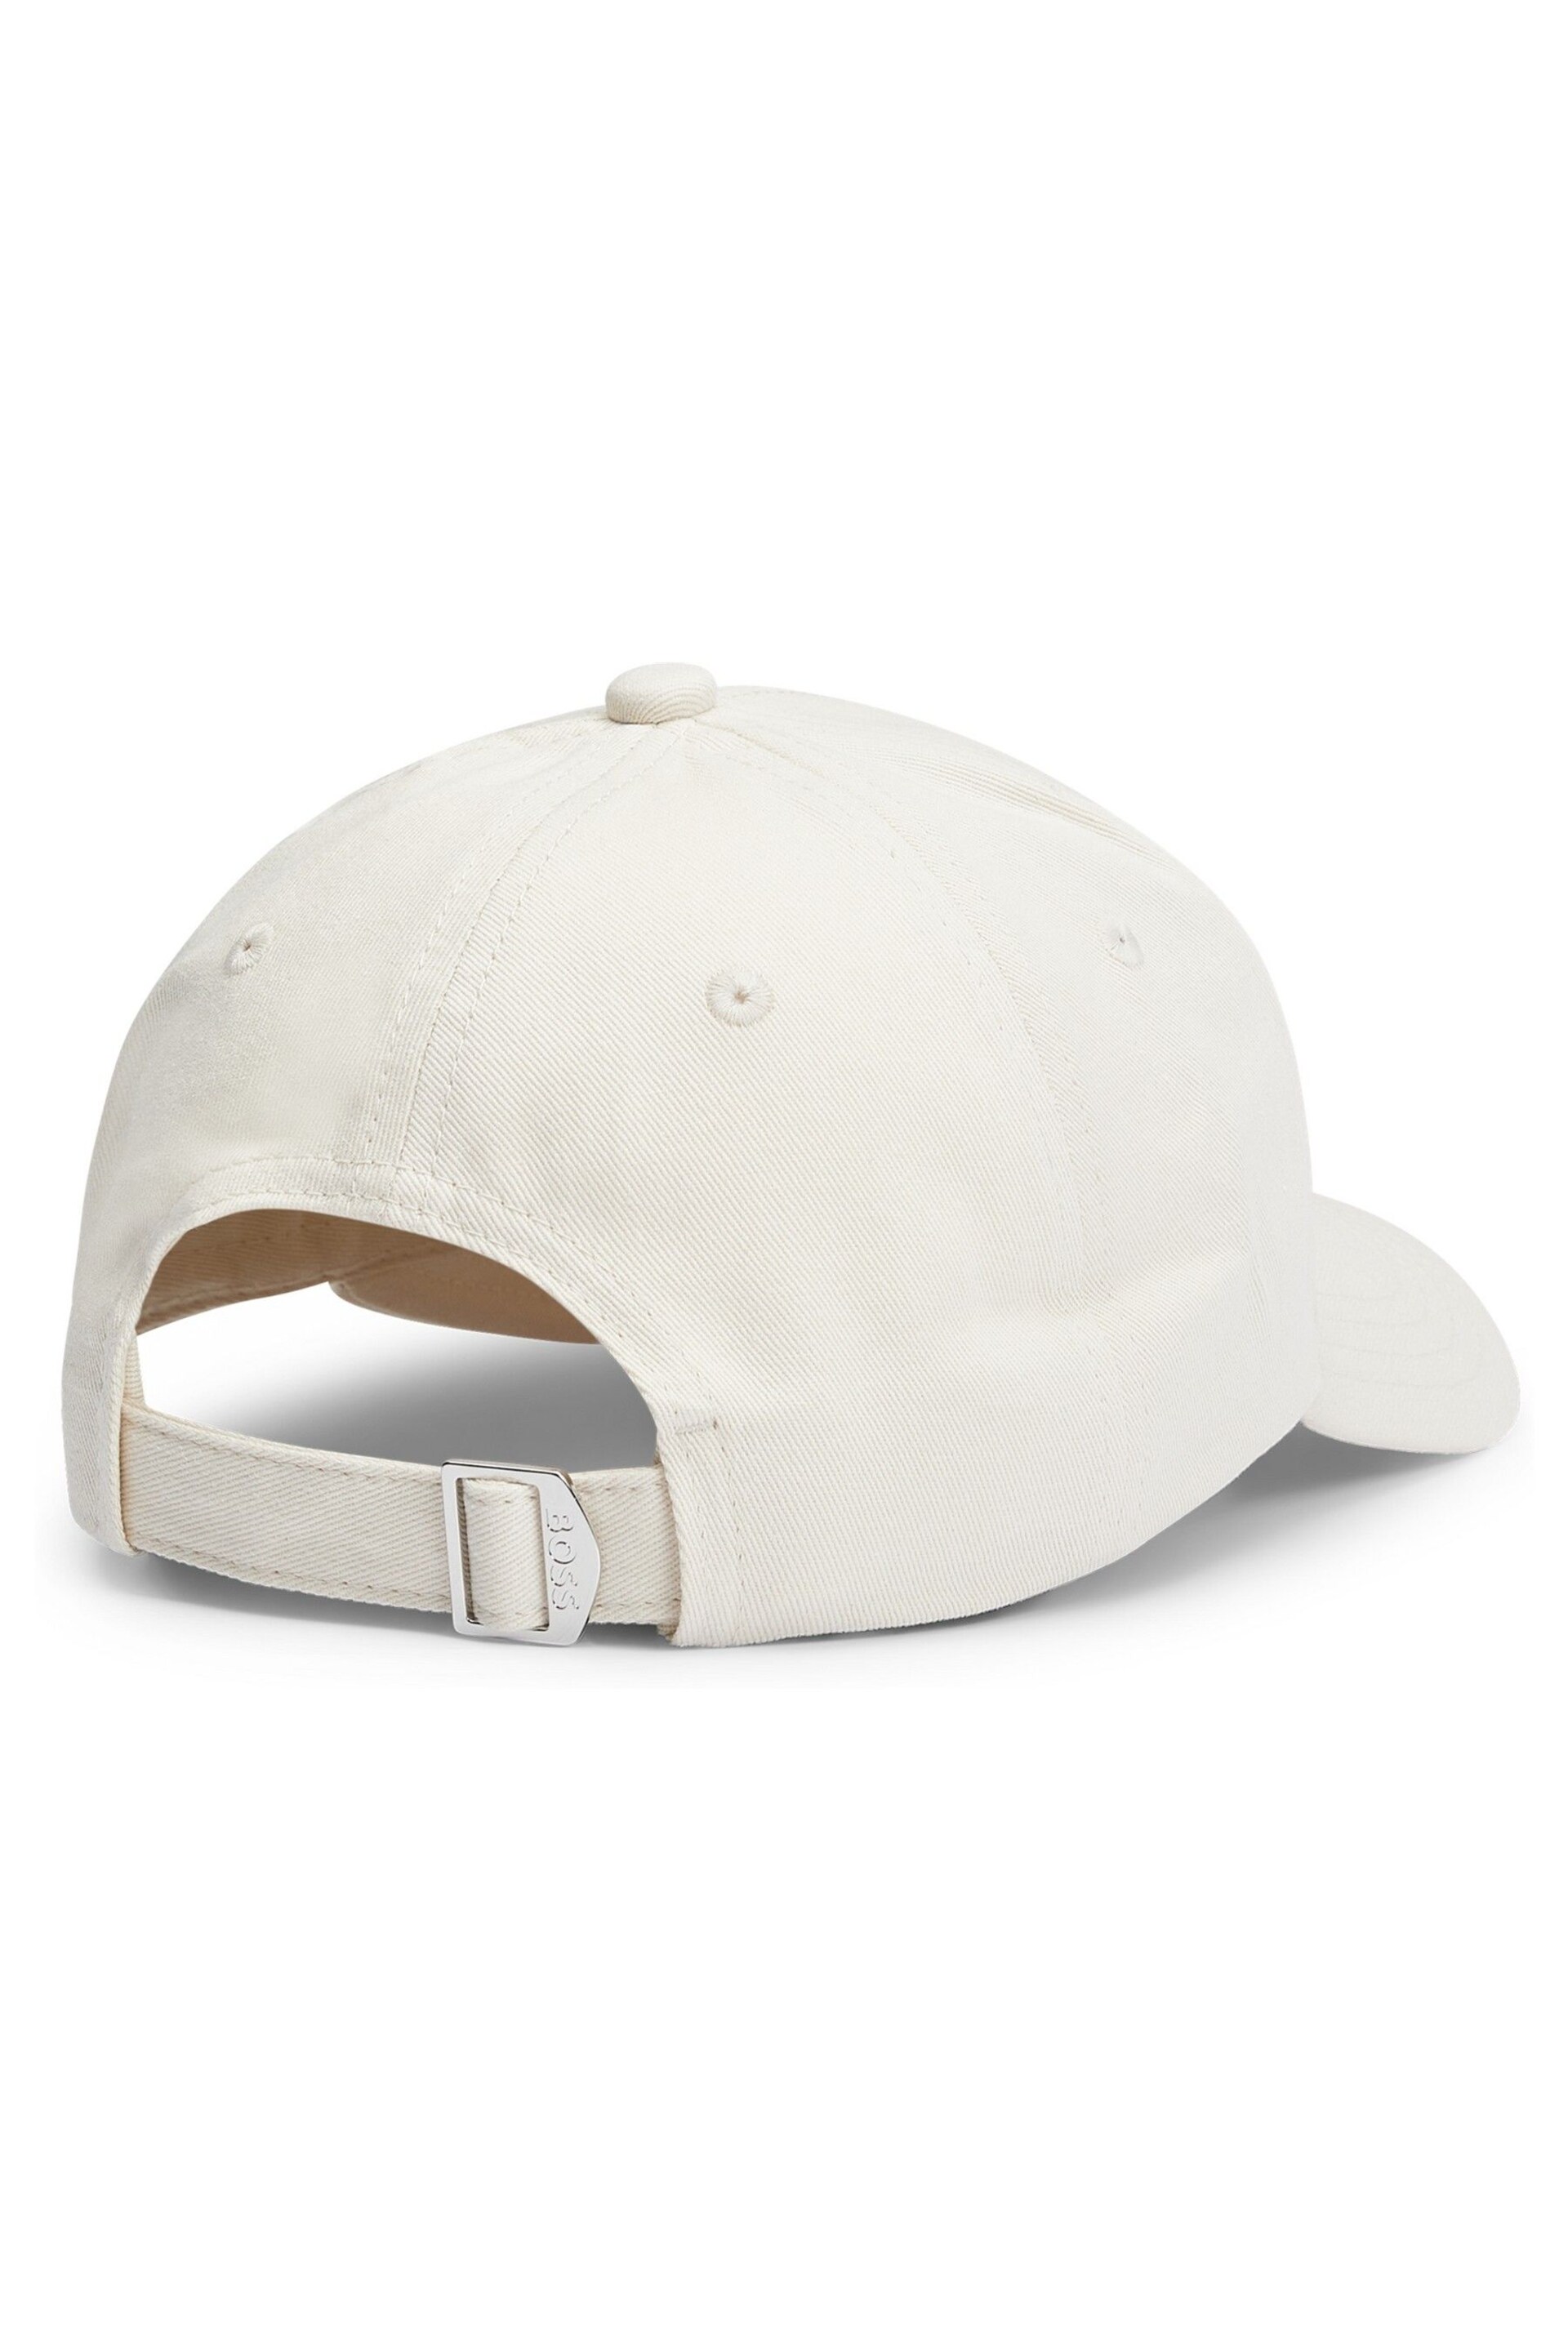 BOSS White Cotton-Twill Six-Panel Cap With Embroidered Logo - Image 3 of 5